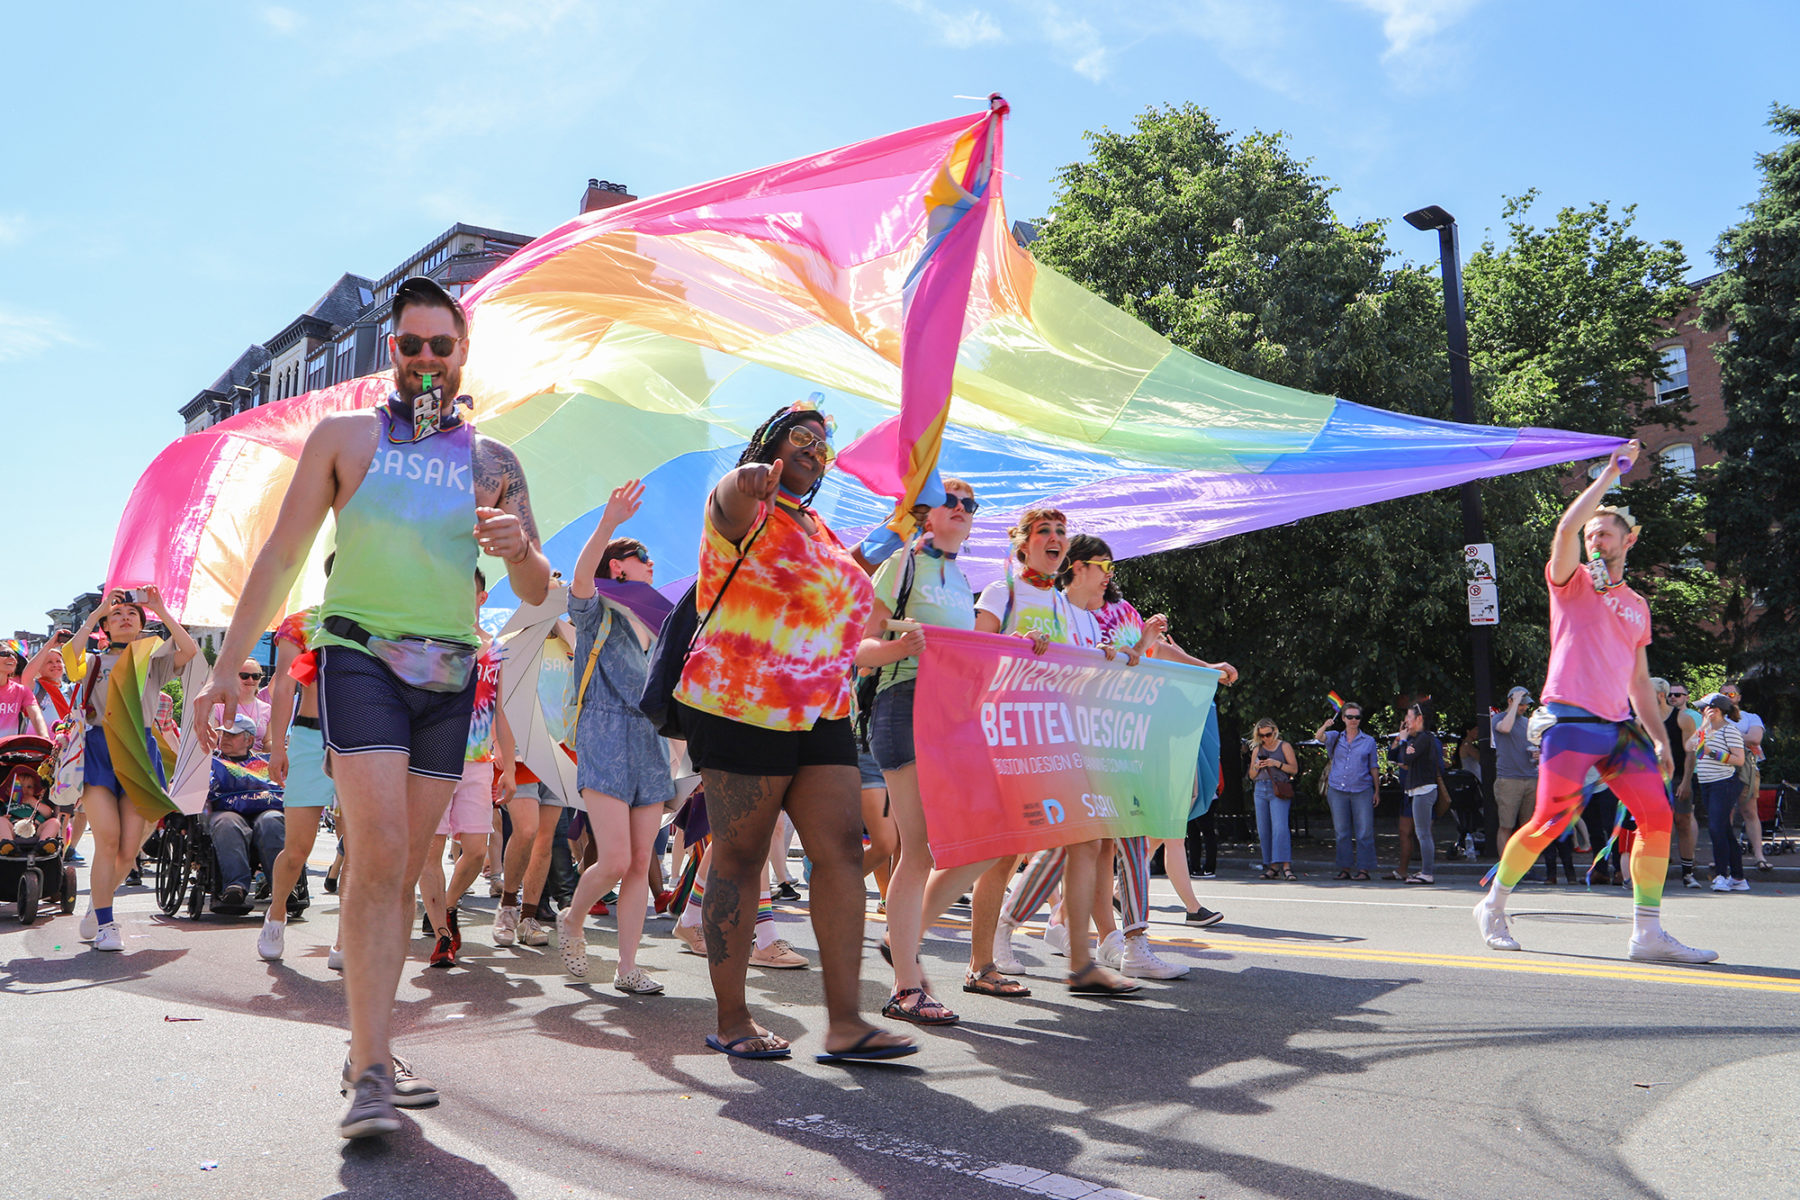 Sasakians marching in Boston's 2019 Pride Parade holding a flag overhead